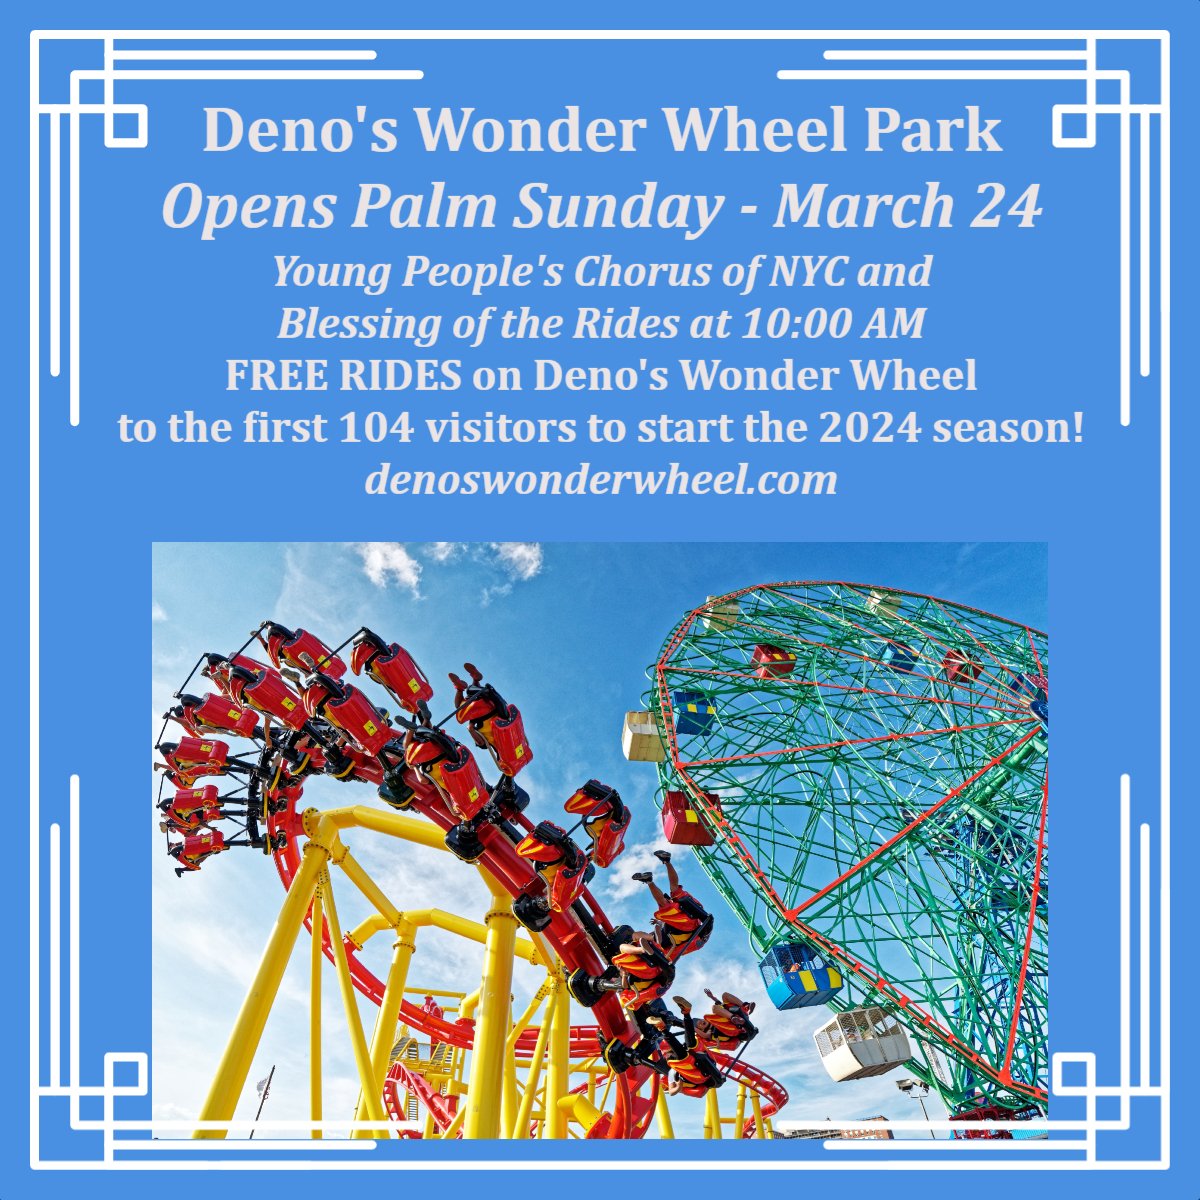 Coney Island's Deno's Wonder Wheel Park opens Palm Sunday, March 24th! Join us for a performance by the Young People’s Chorus of New York City (@ypcofnyc) & the Blessing of the Rides at 10:00 AM. FREE RIDES on Deno's Wonder Wheel to the first 104 guests to start the 2024 season!